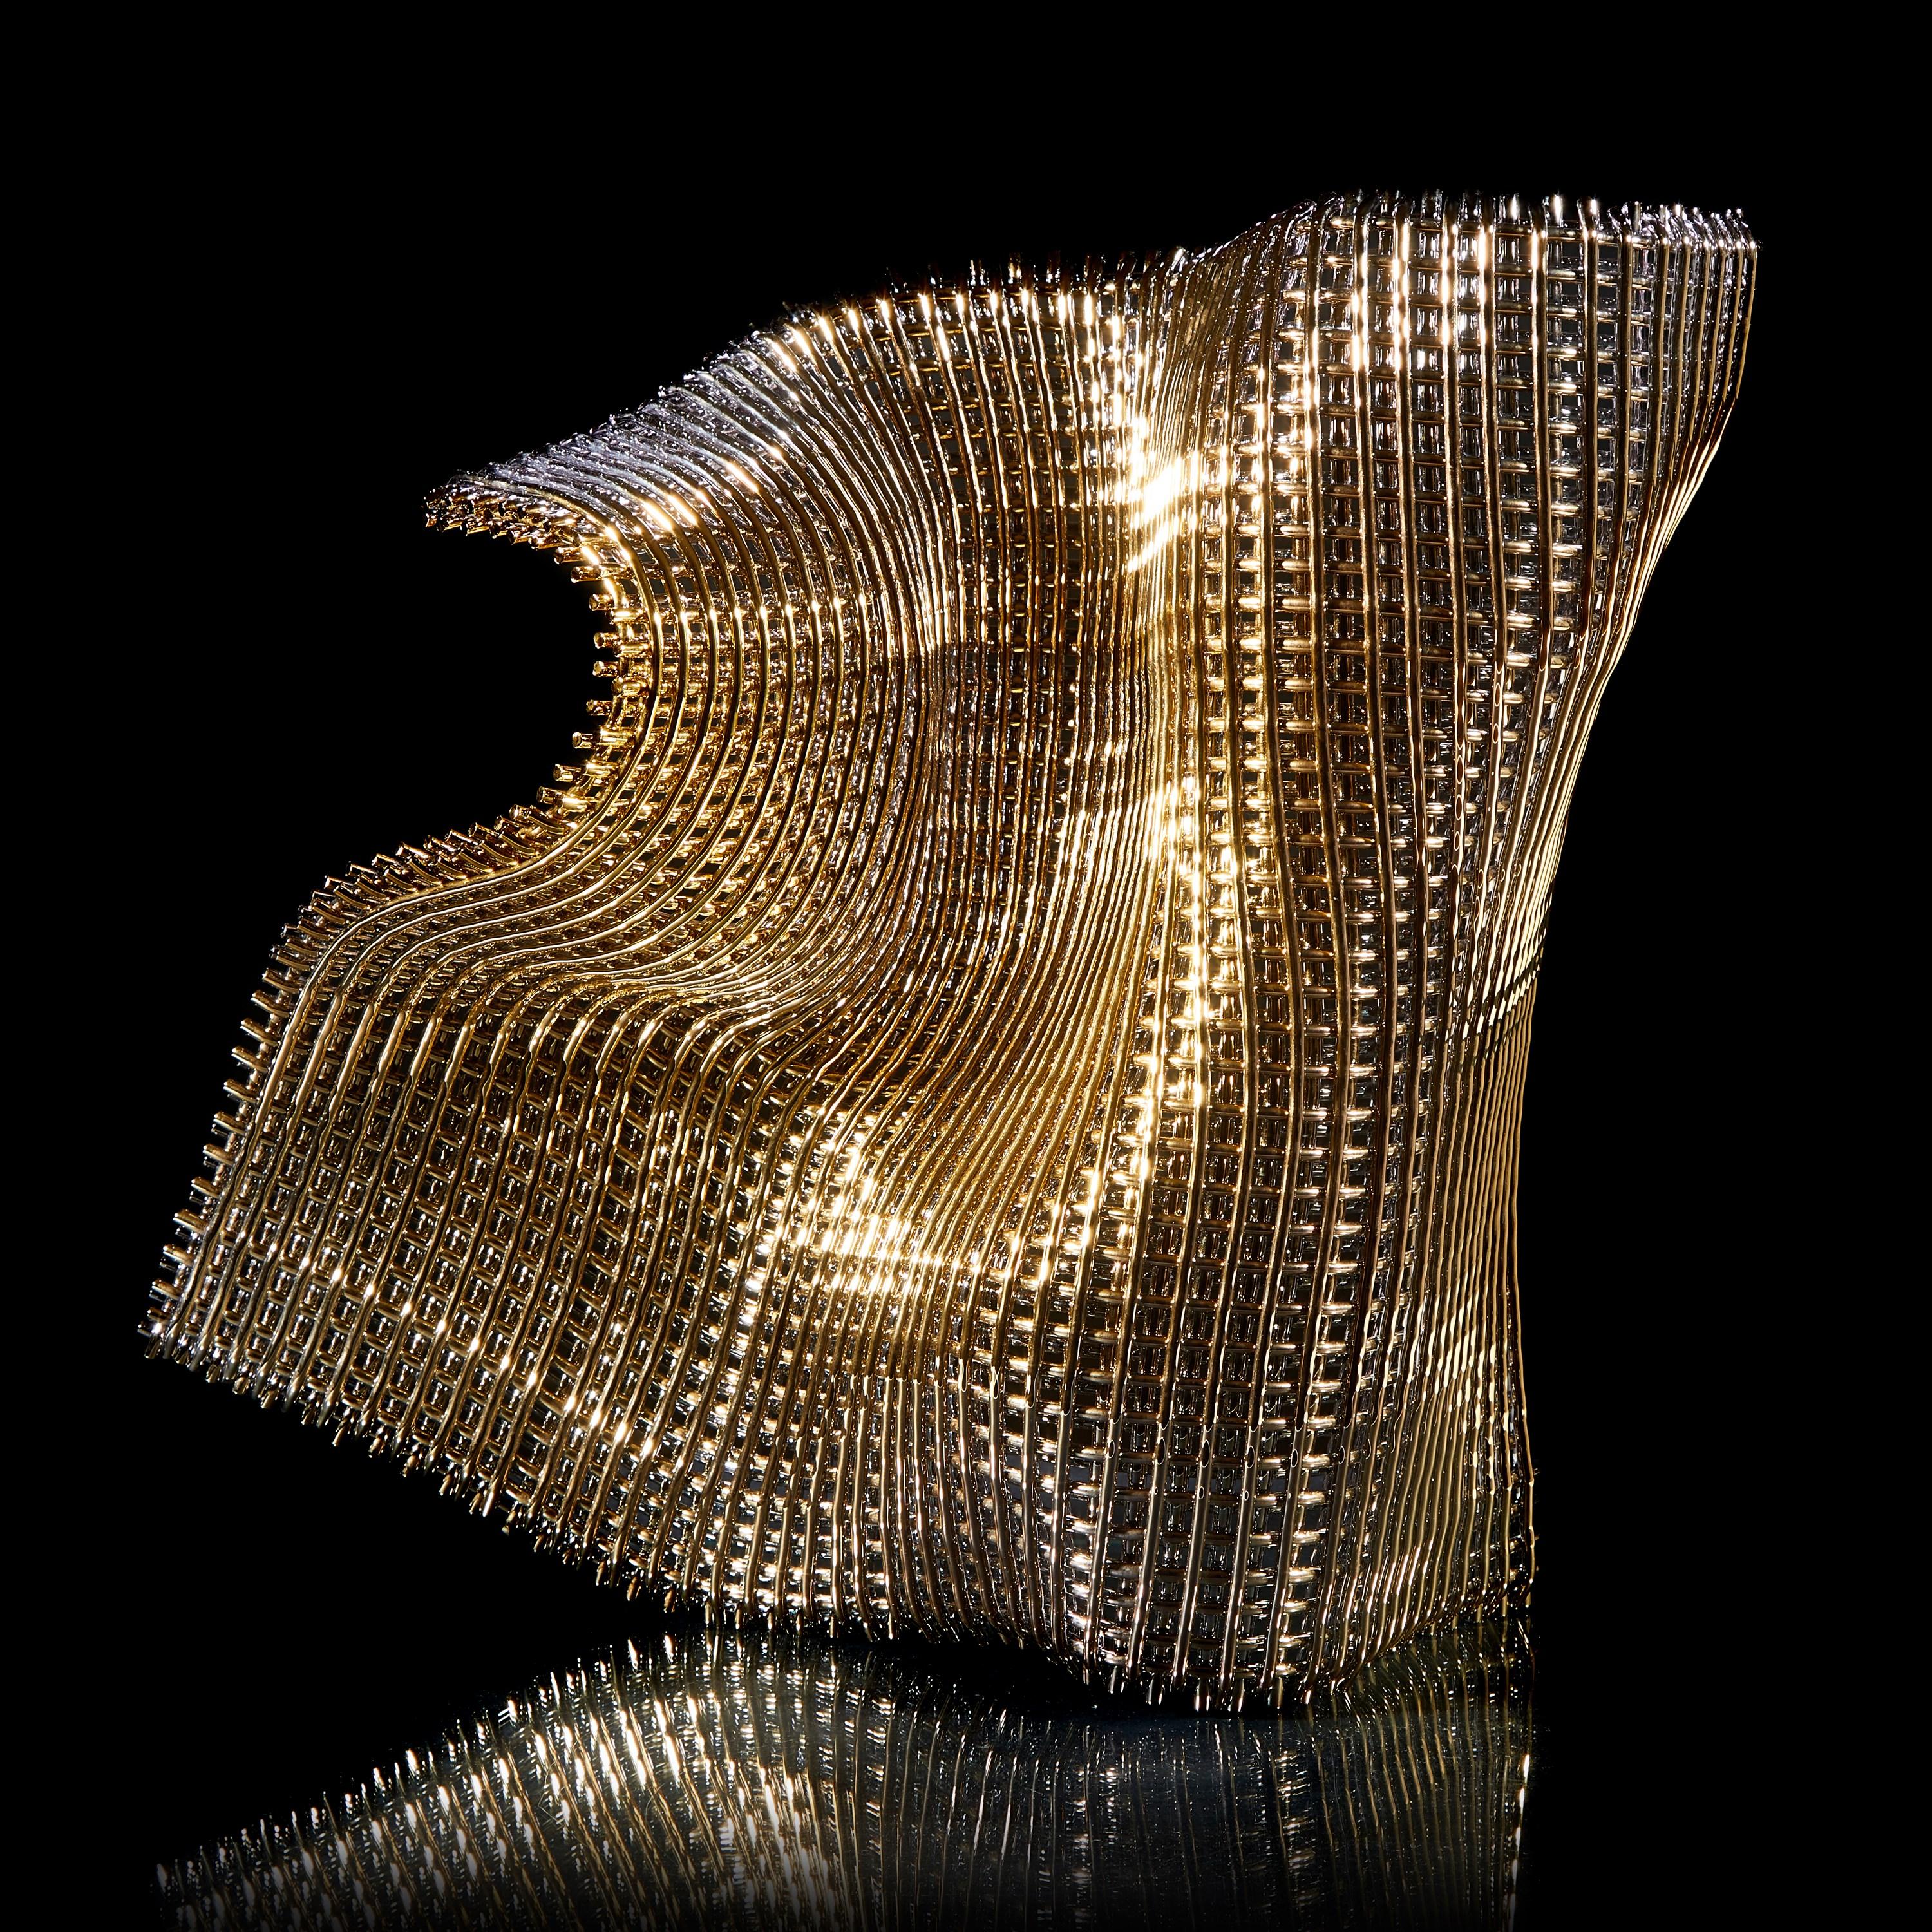 Gold Masquerade, a woven gold & glass standing abstract sculpture by Cathryn Shilling